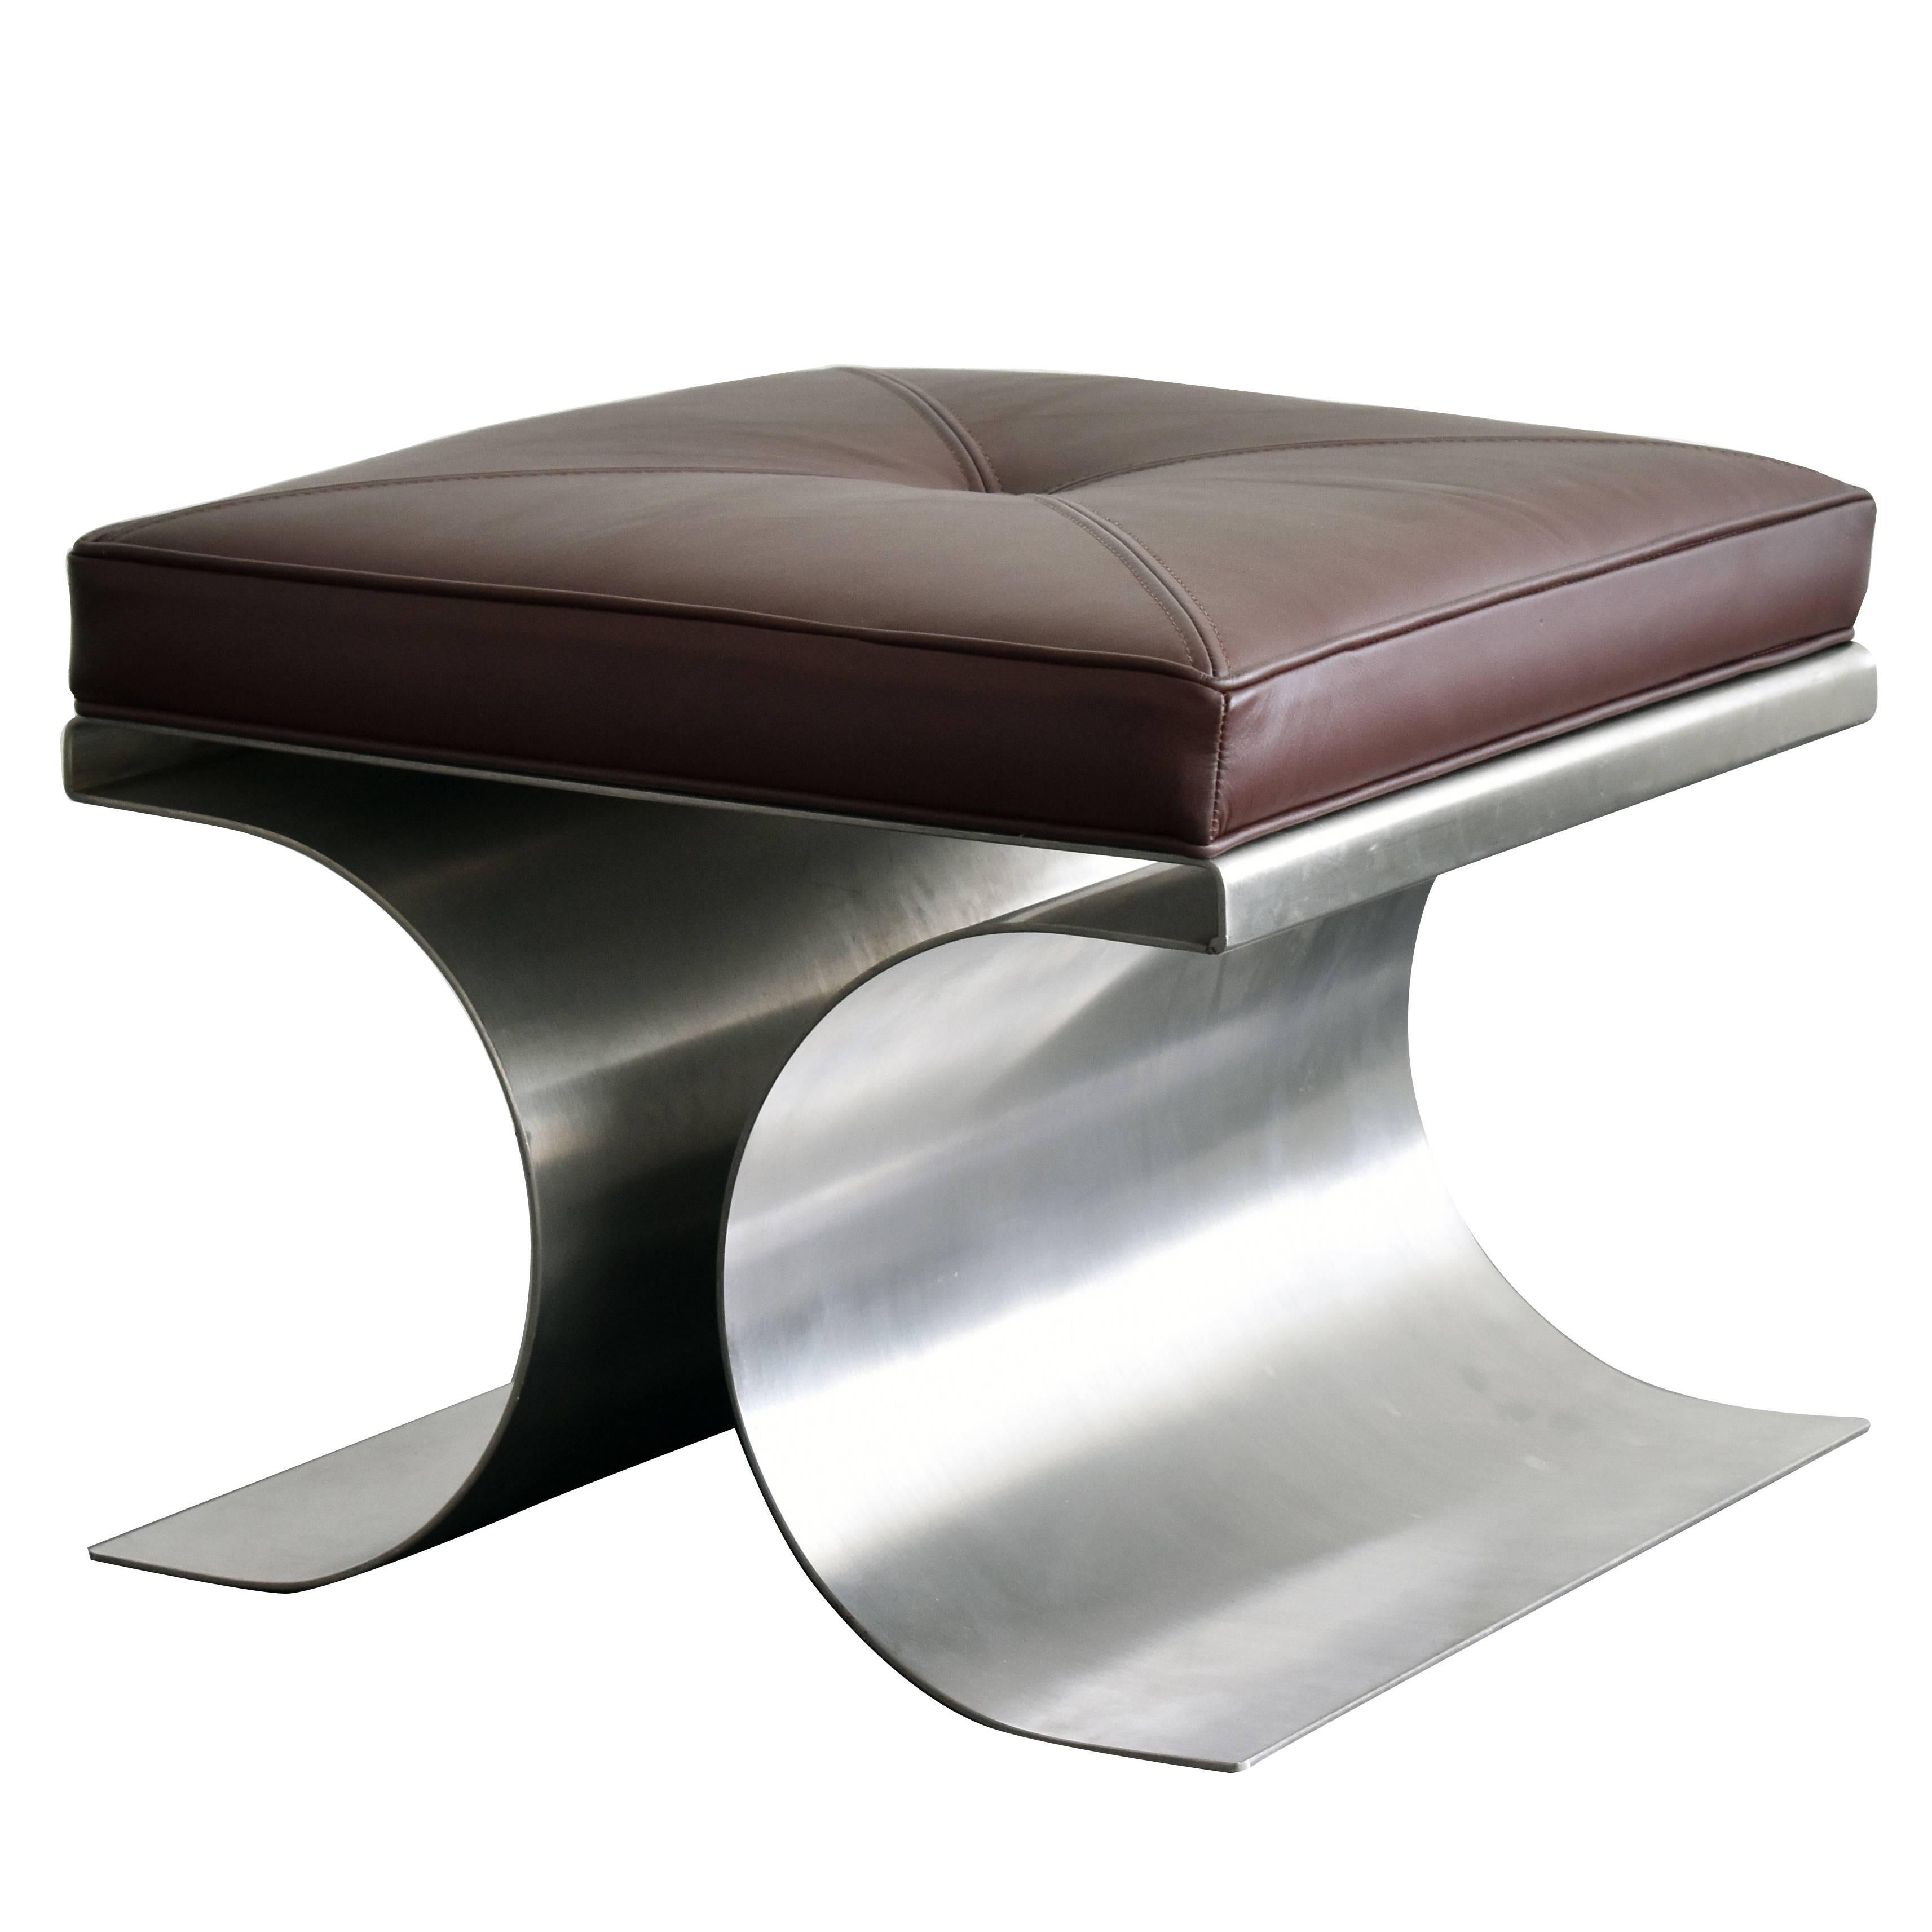 Michel Boyer, "X" Stool, Stainless Steel and Brown Leather Cushion, 1968, French